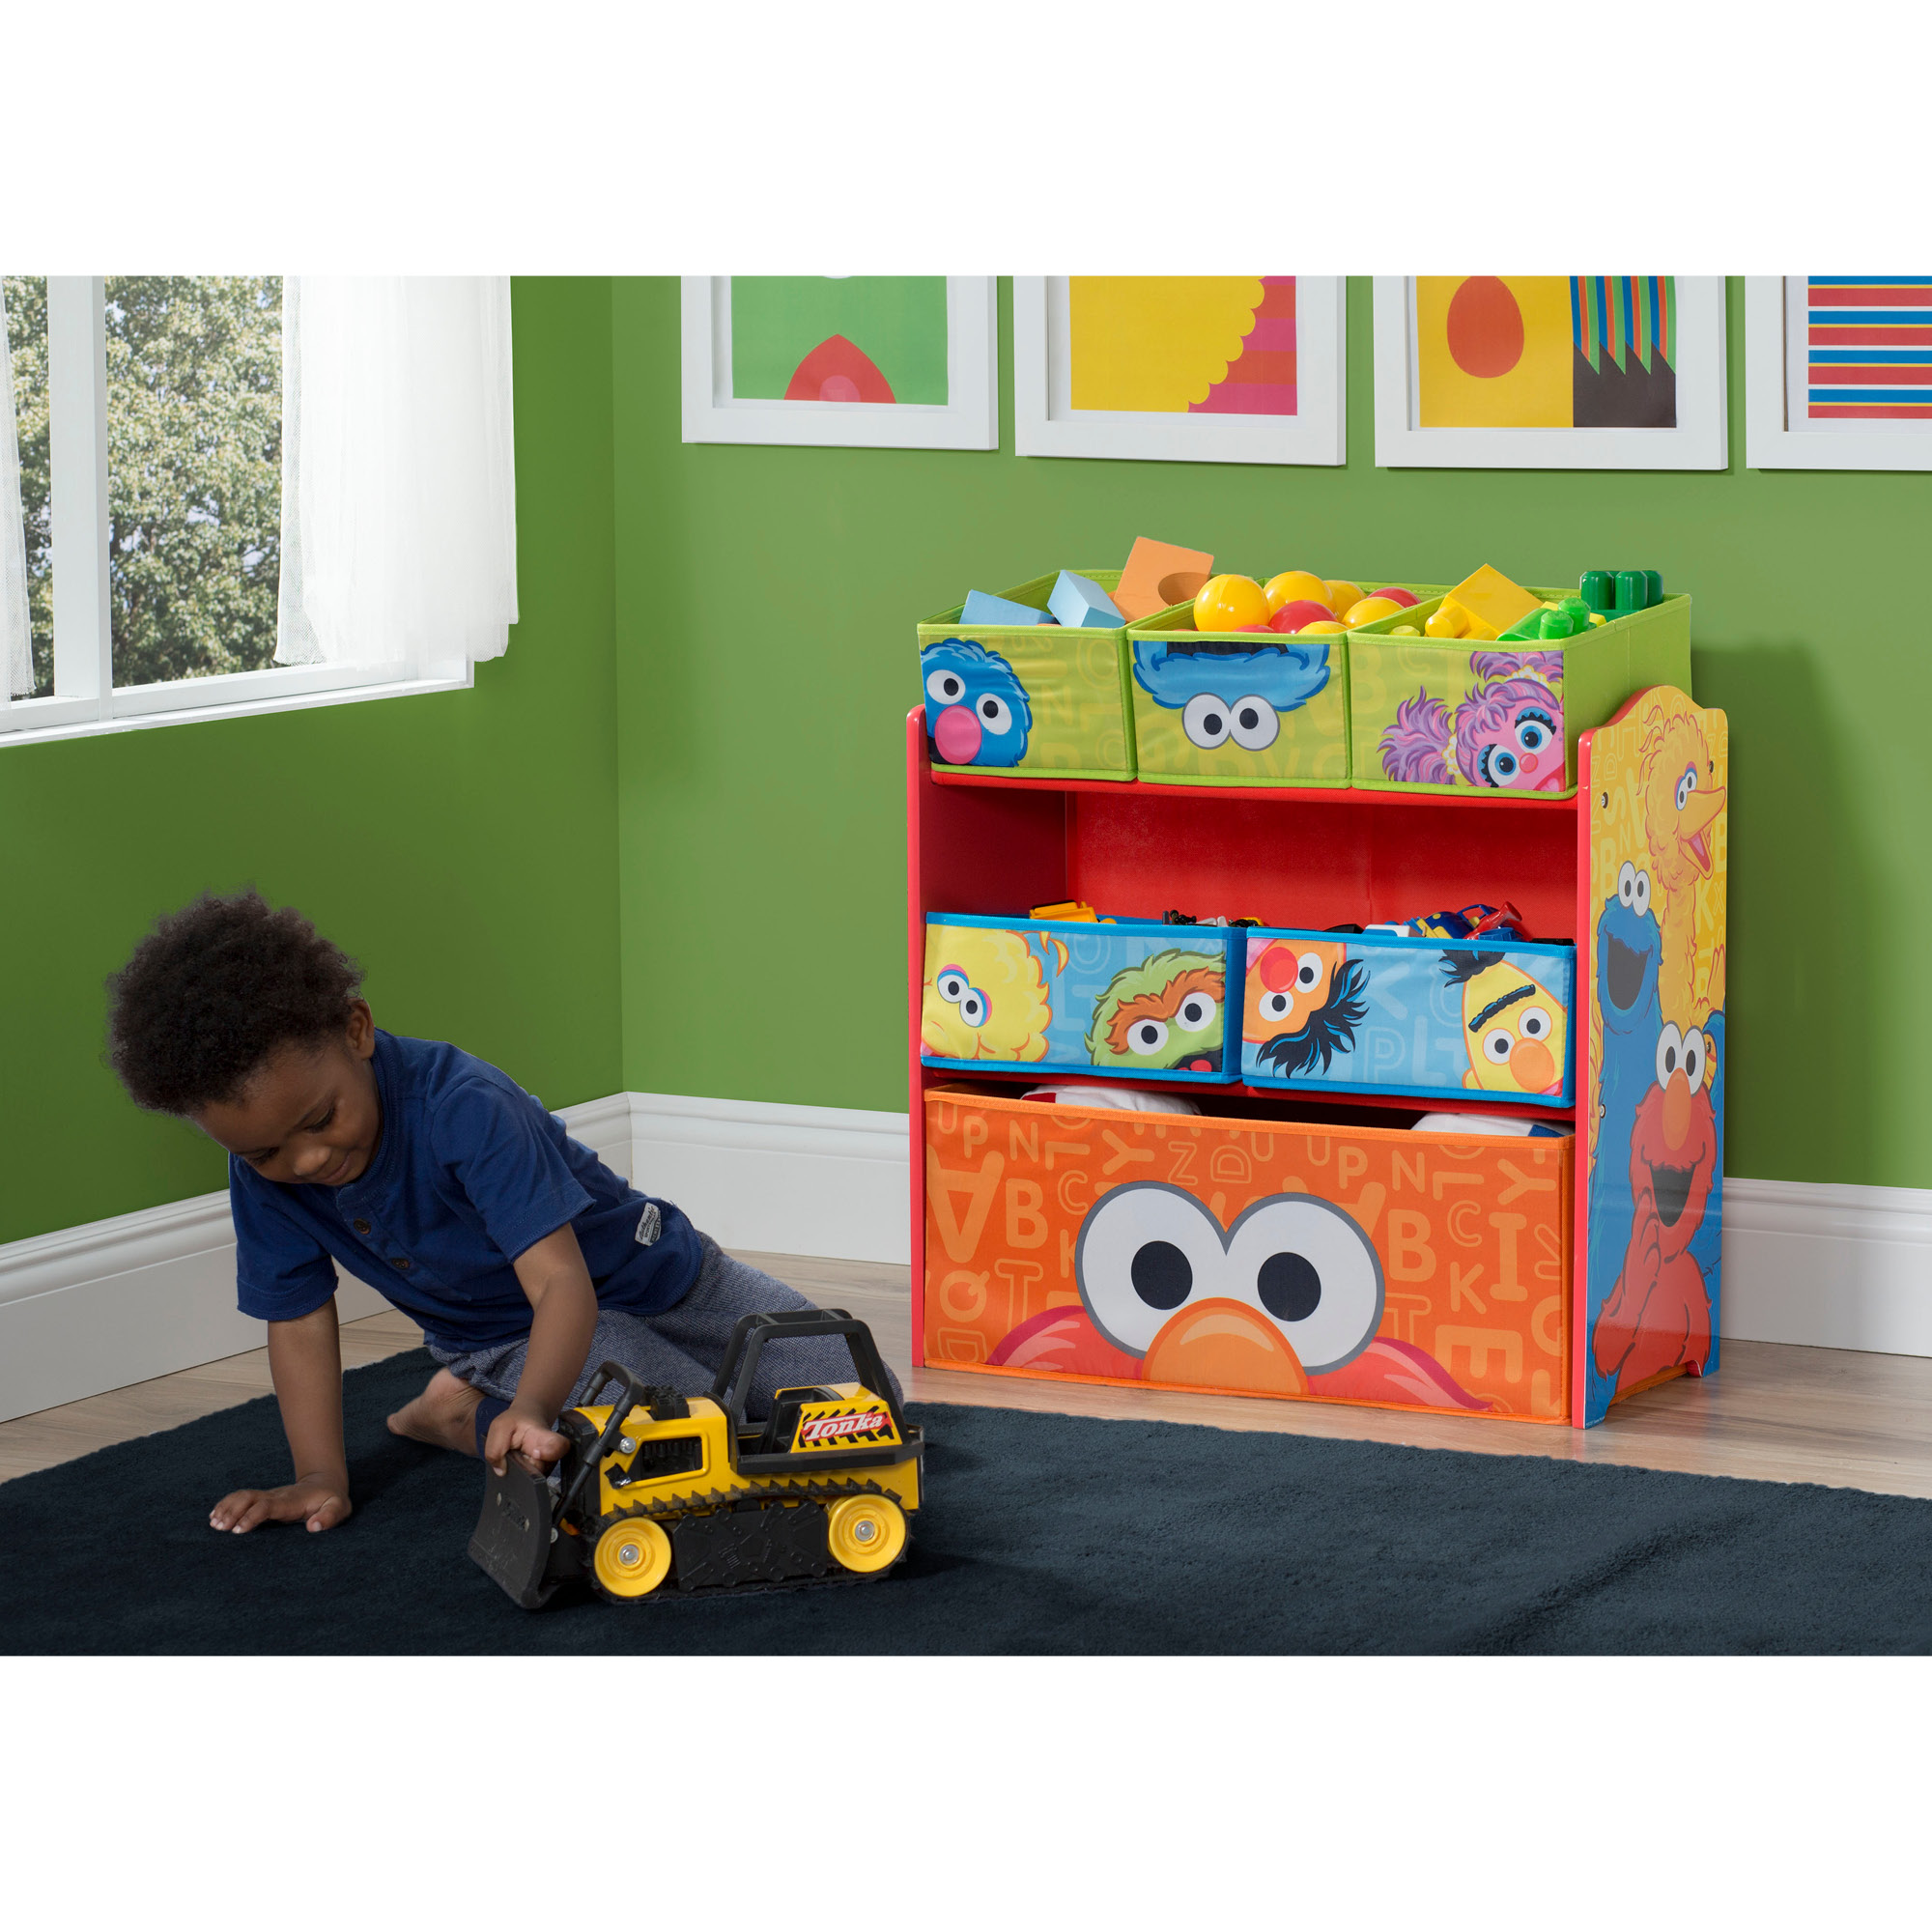 Sesame Street 6 Bin Design and Store Toy Organizer by Delta Children - Durable Engineered Wood, Solid Wood and Fabric Construction, Multi Color - image 5 of 8